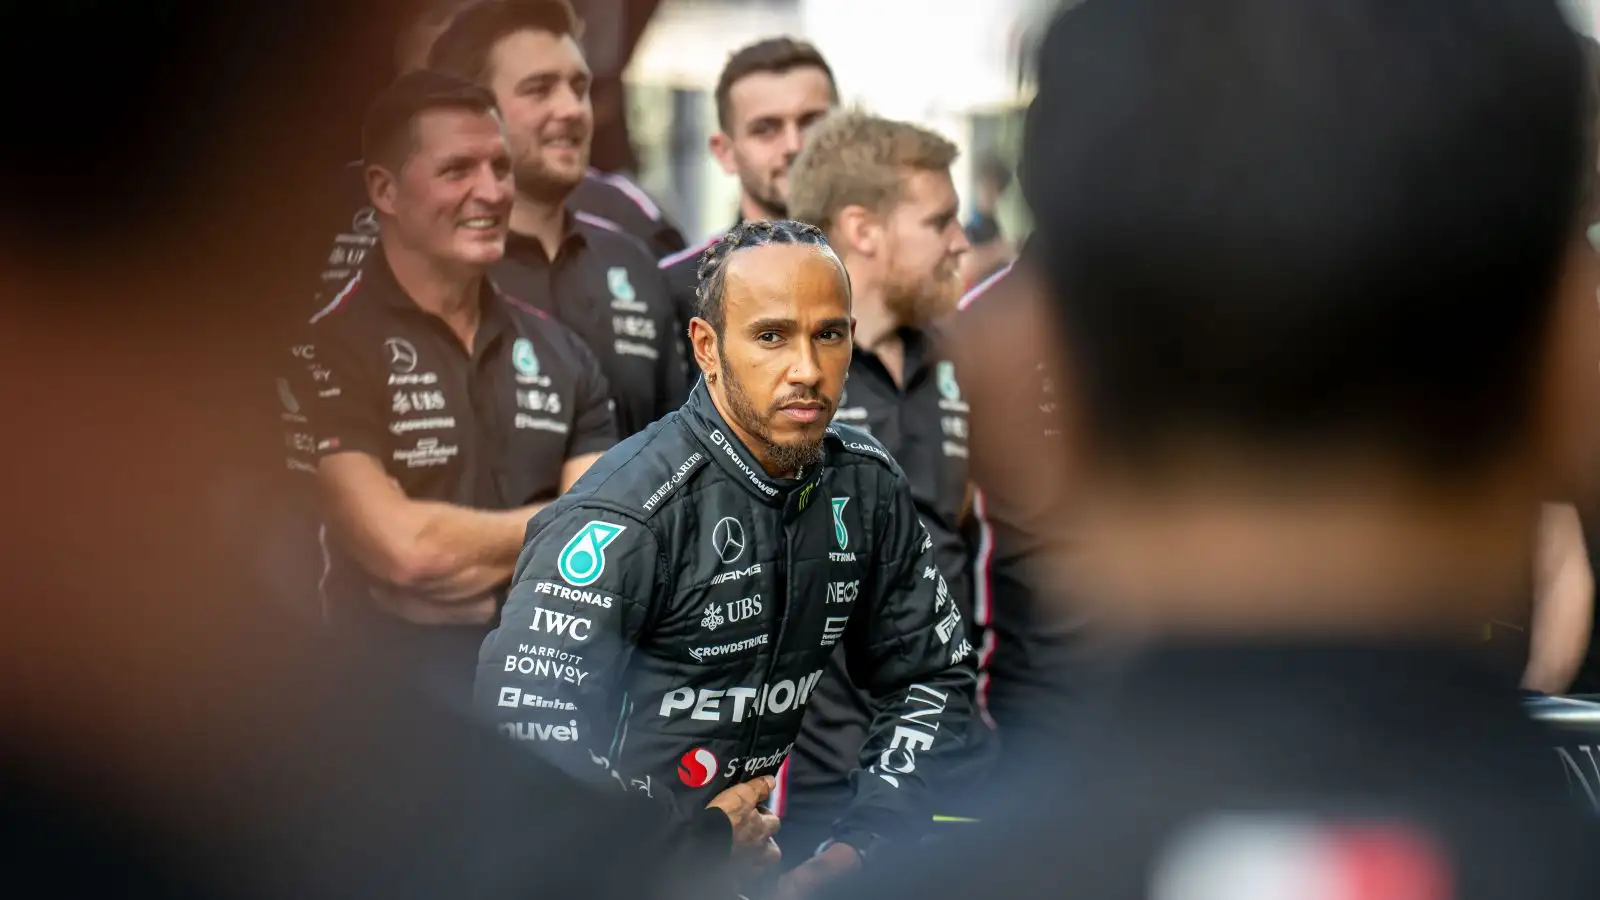 Lewis Hamilton pictured among members of the Mercedes team.